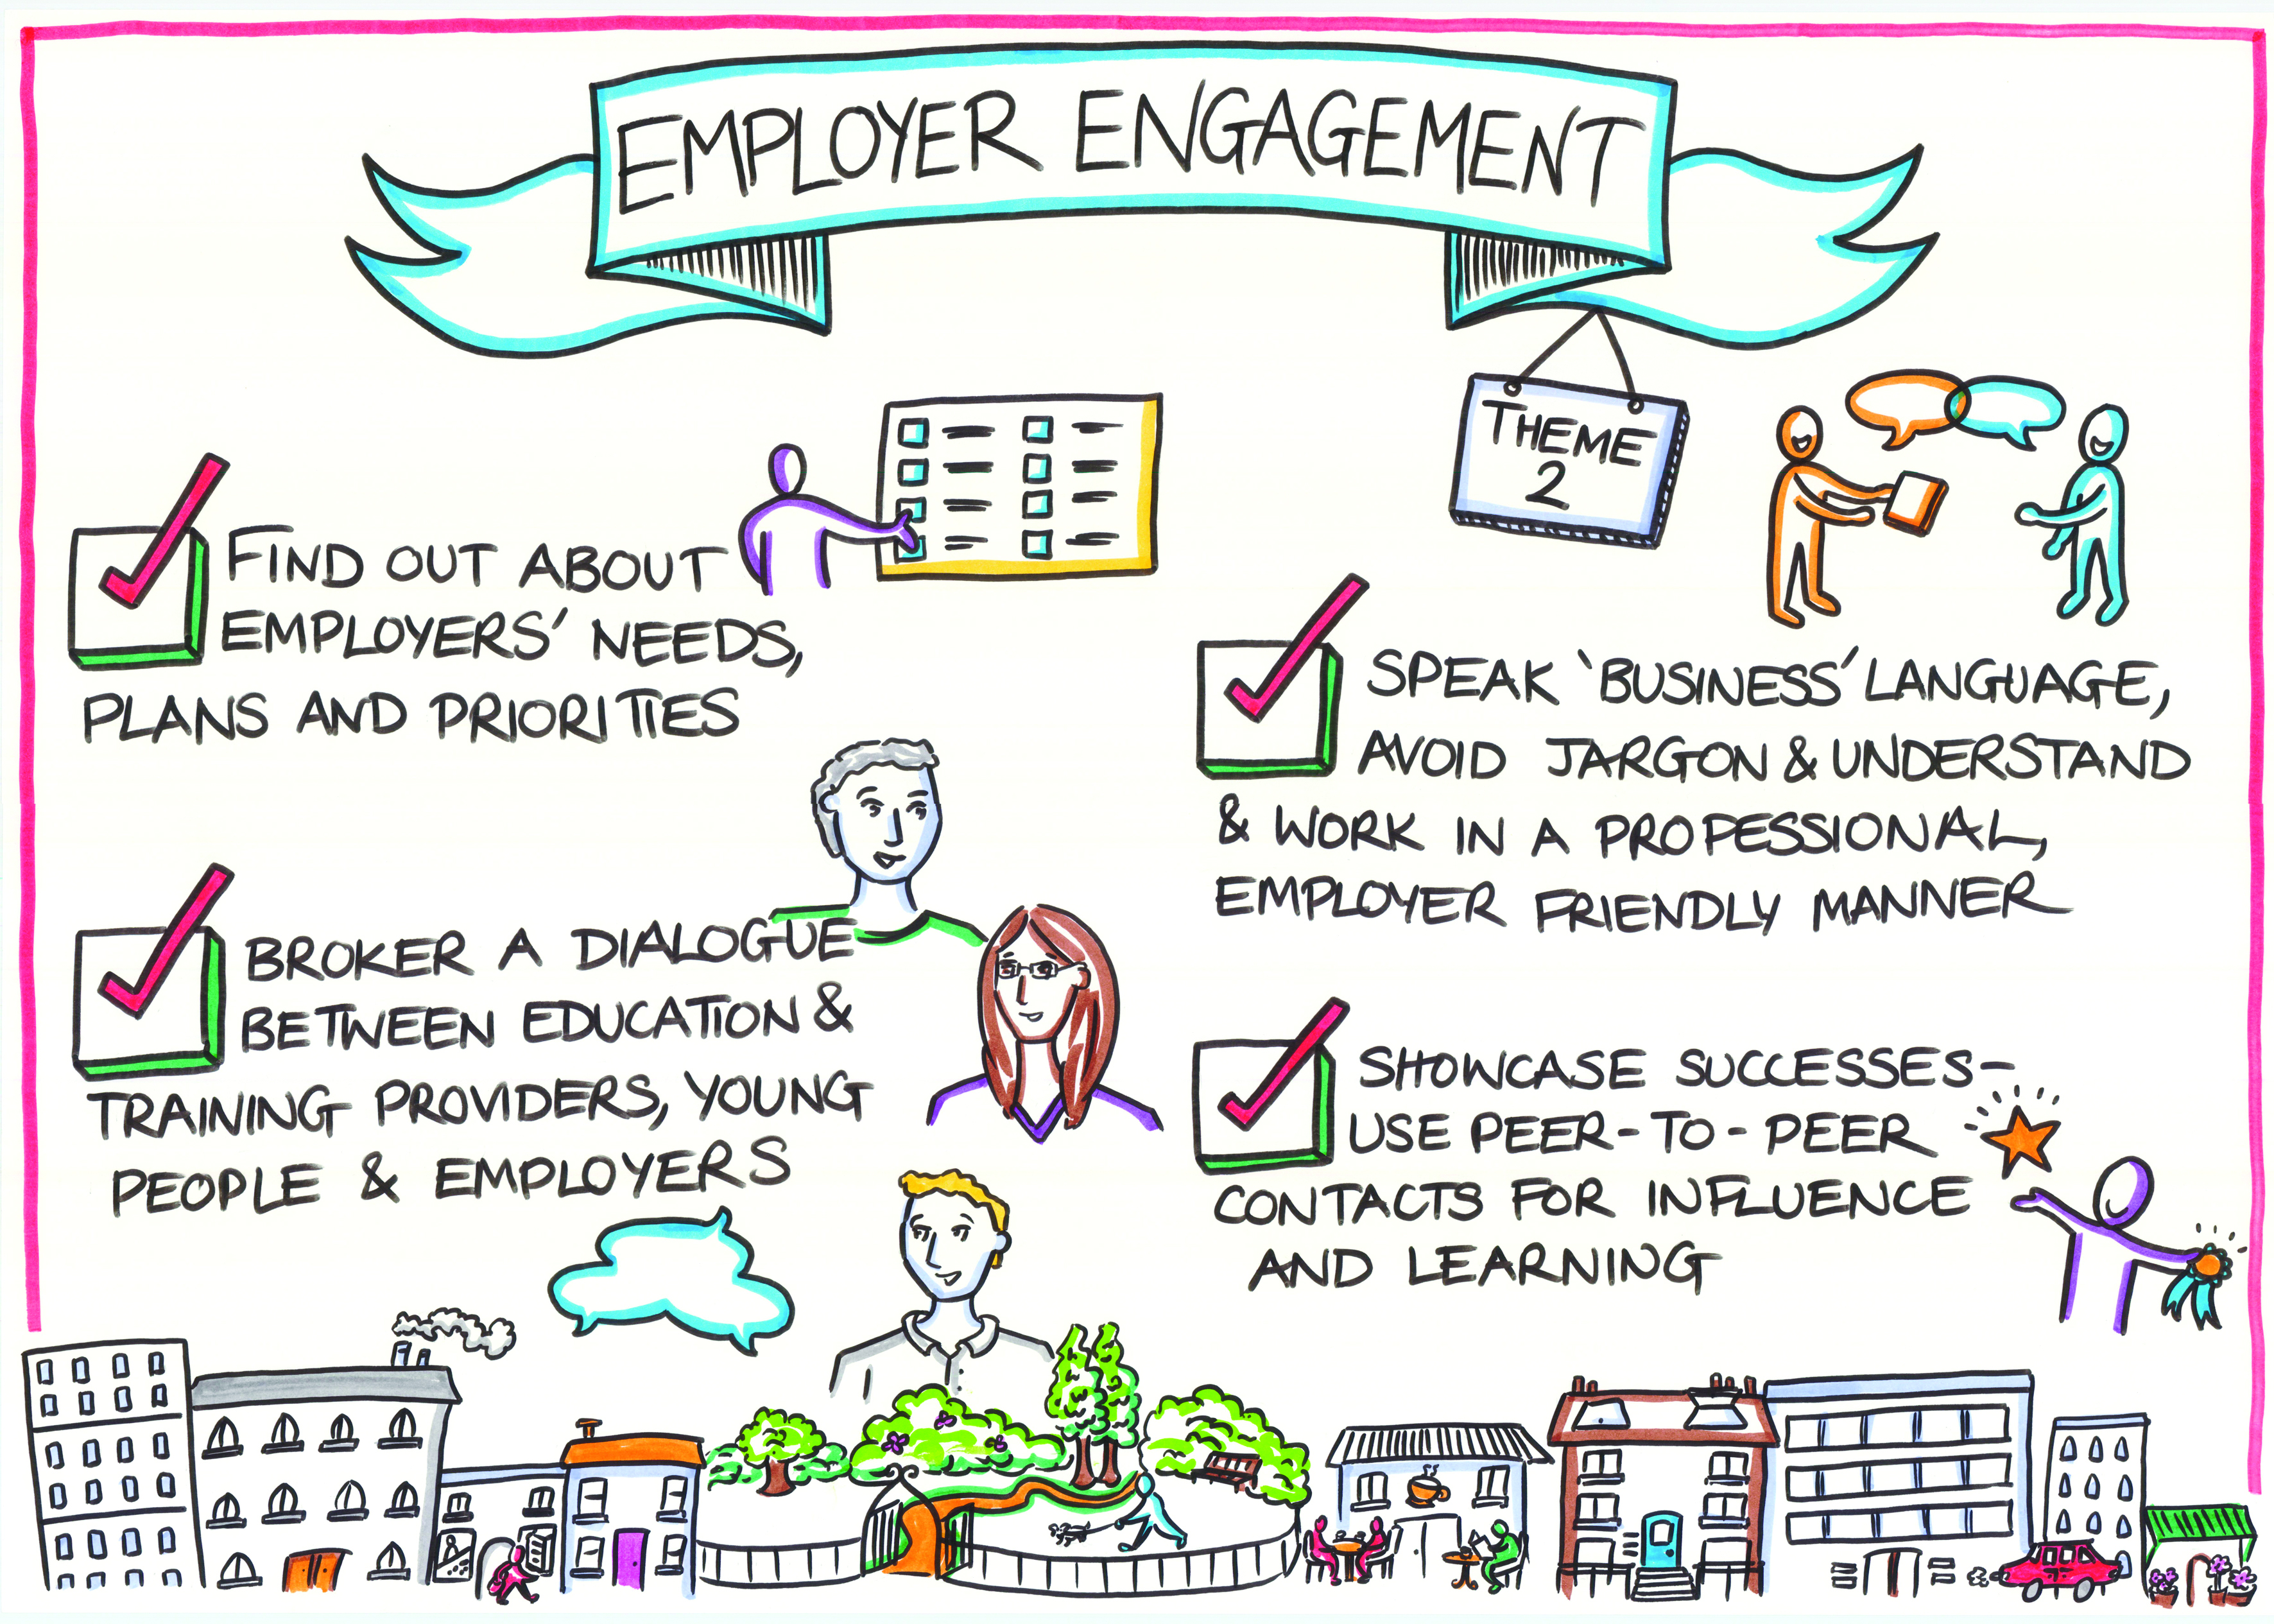 Engaging employers - Poster - Rachel Walsh